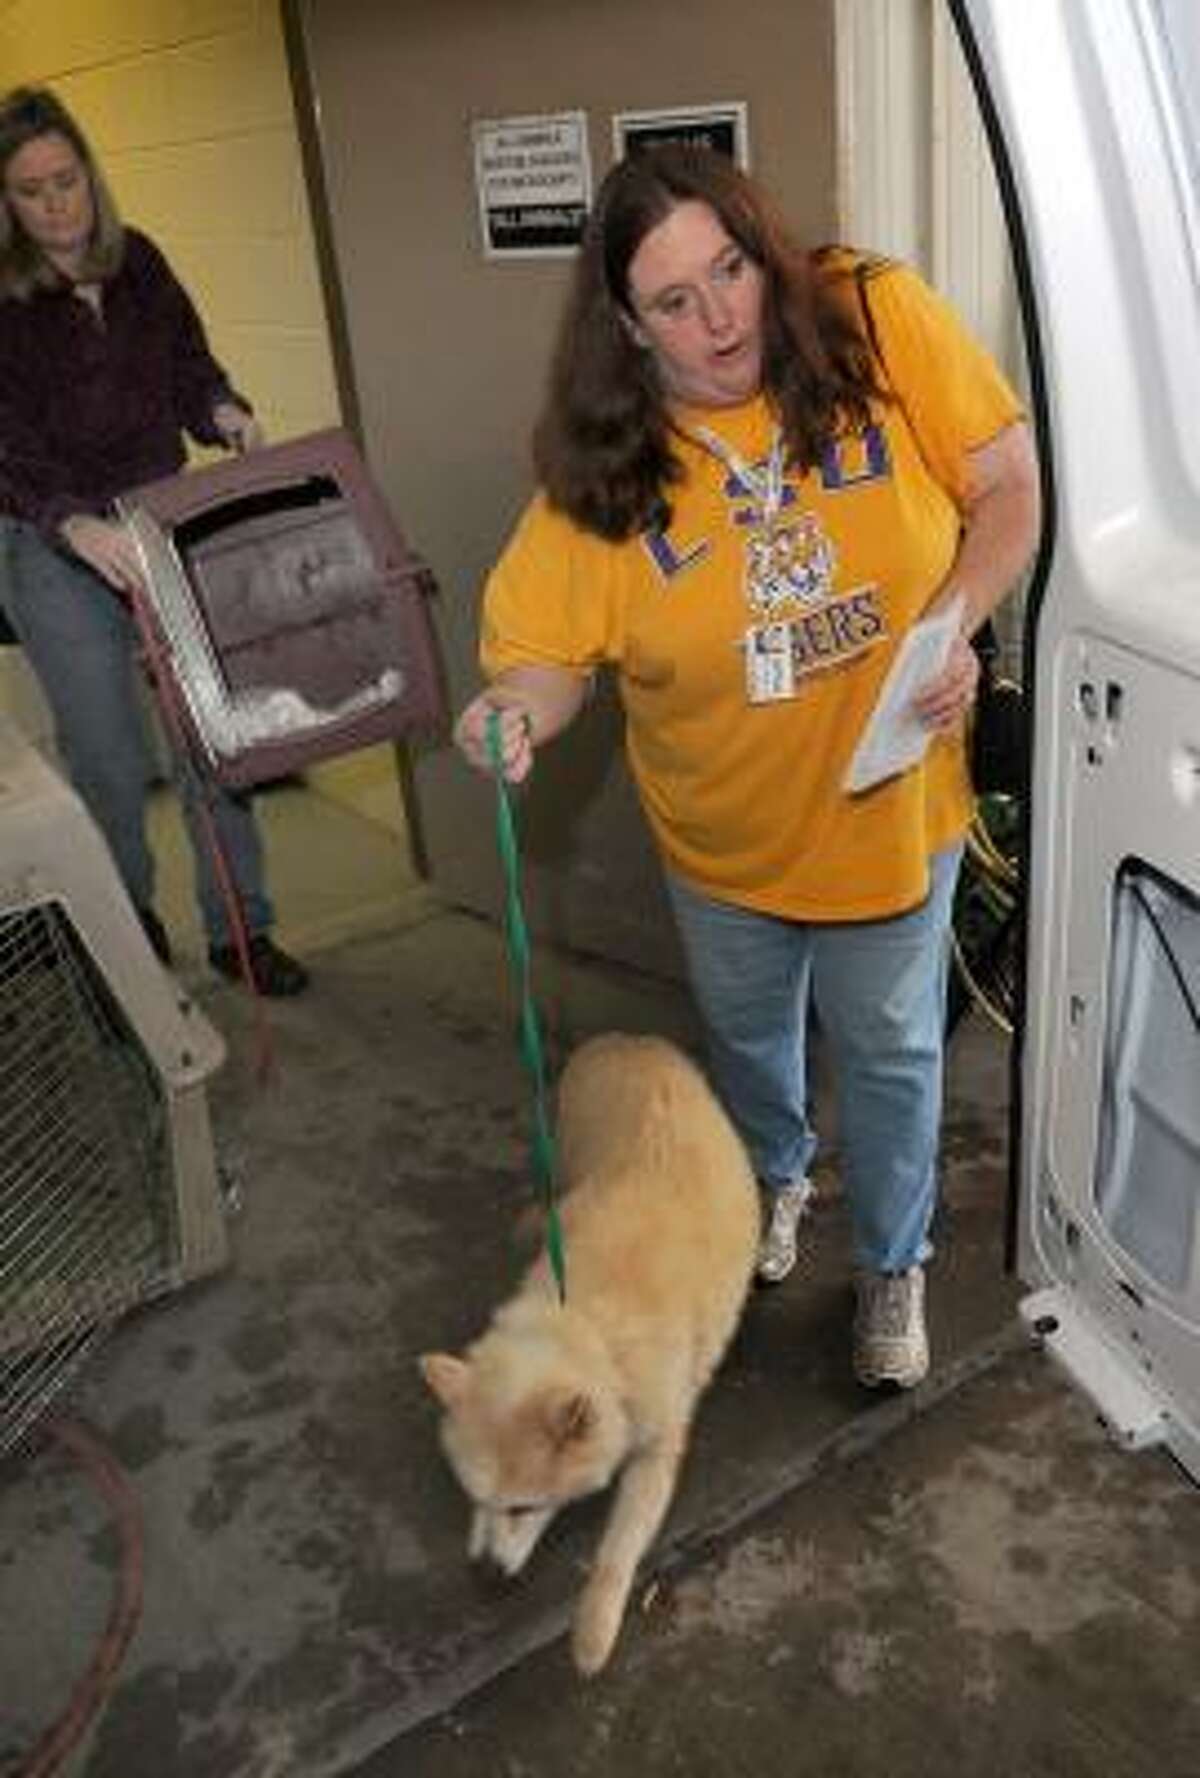 Woman agrees to close down animal-rescue facility